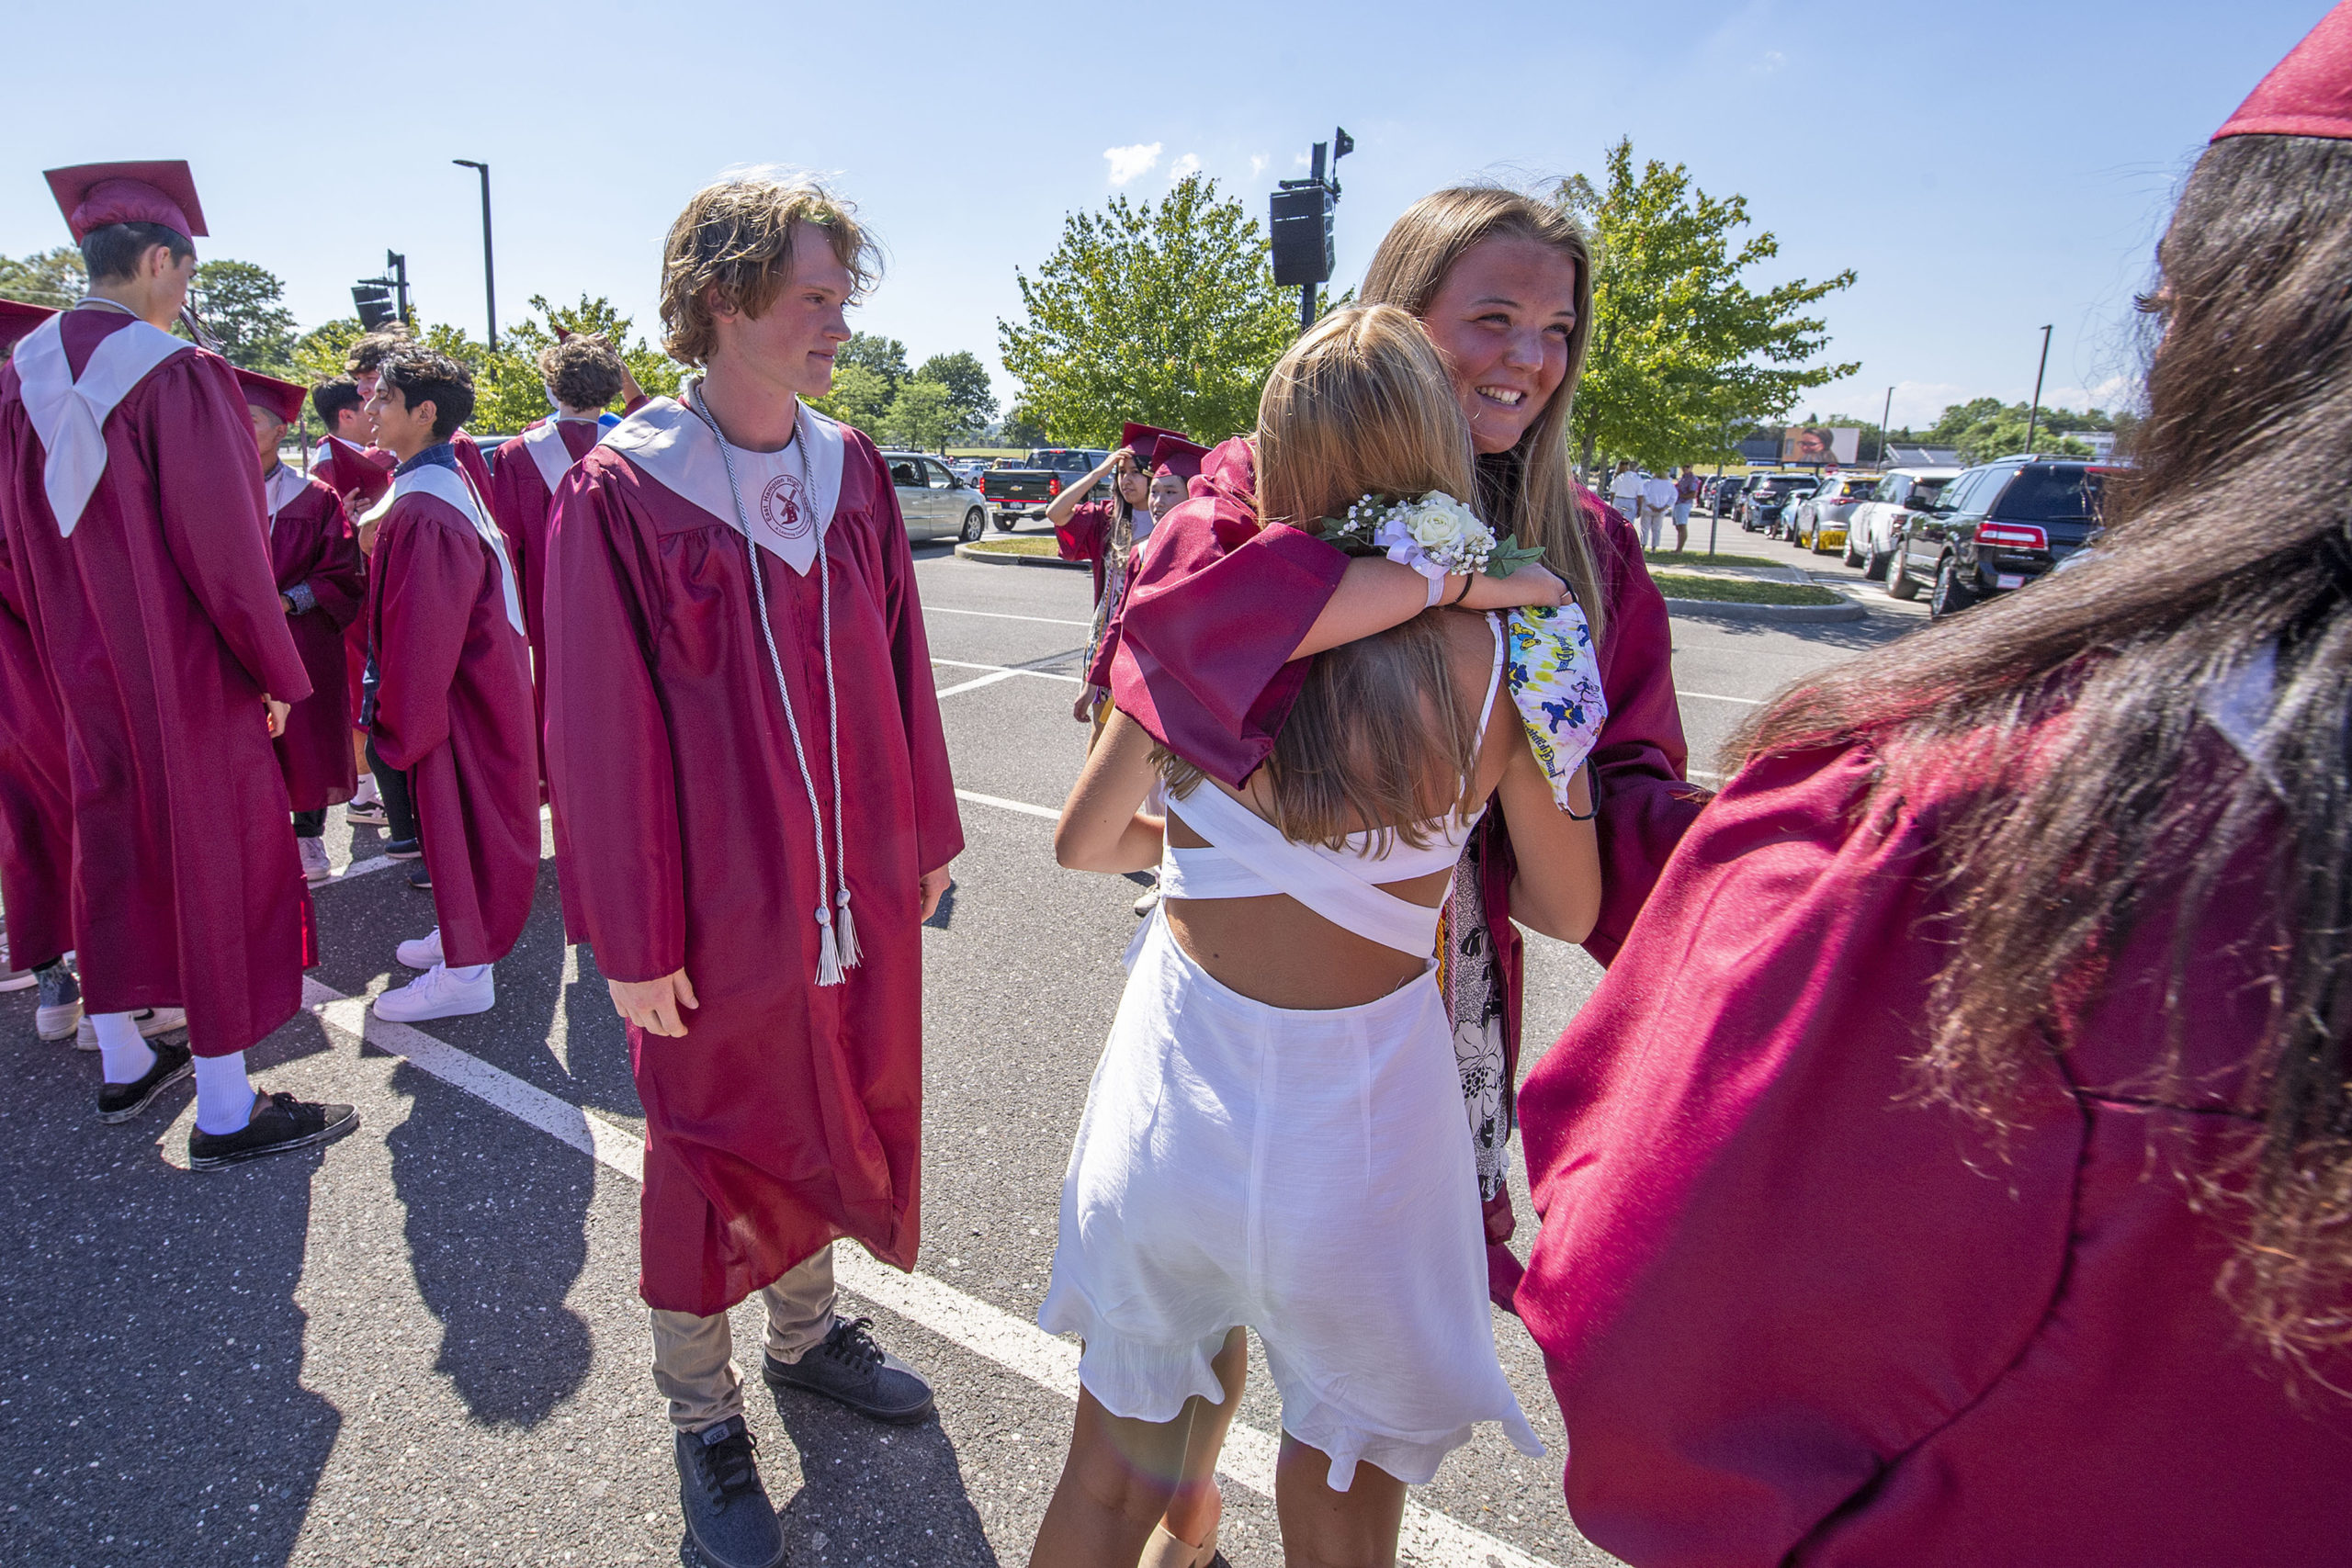 East Hampton High School Seniors traded hugs and smiles as they got ready to participate in the 2020 graduation ceremony at the East Hampton High School on Friday.